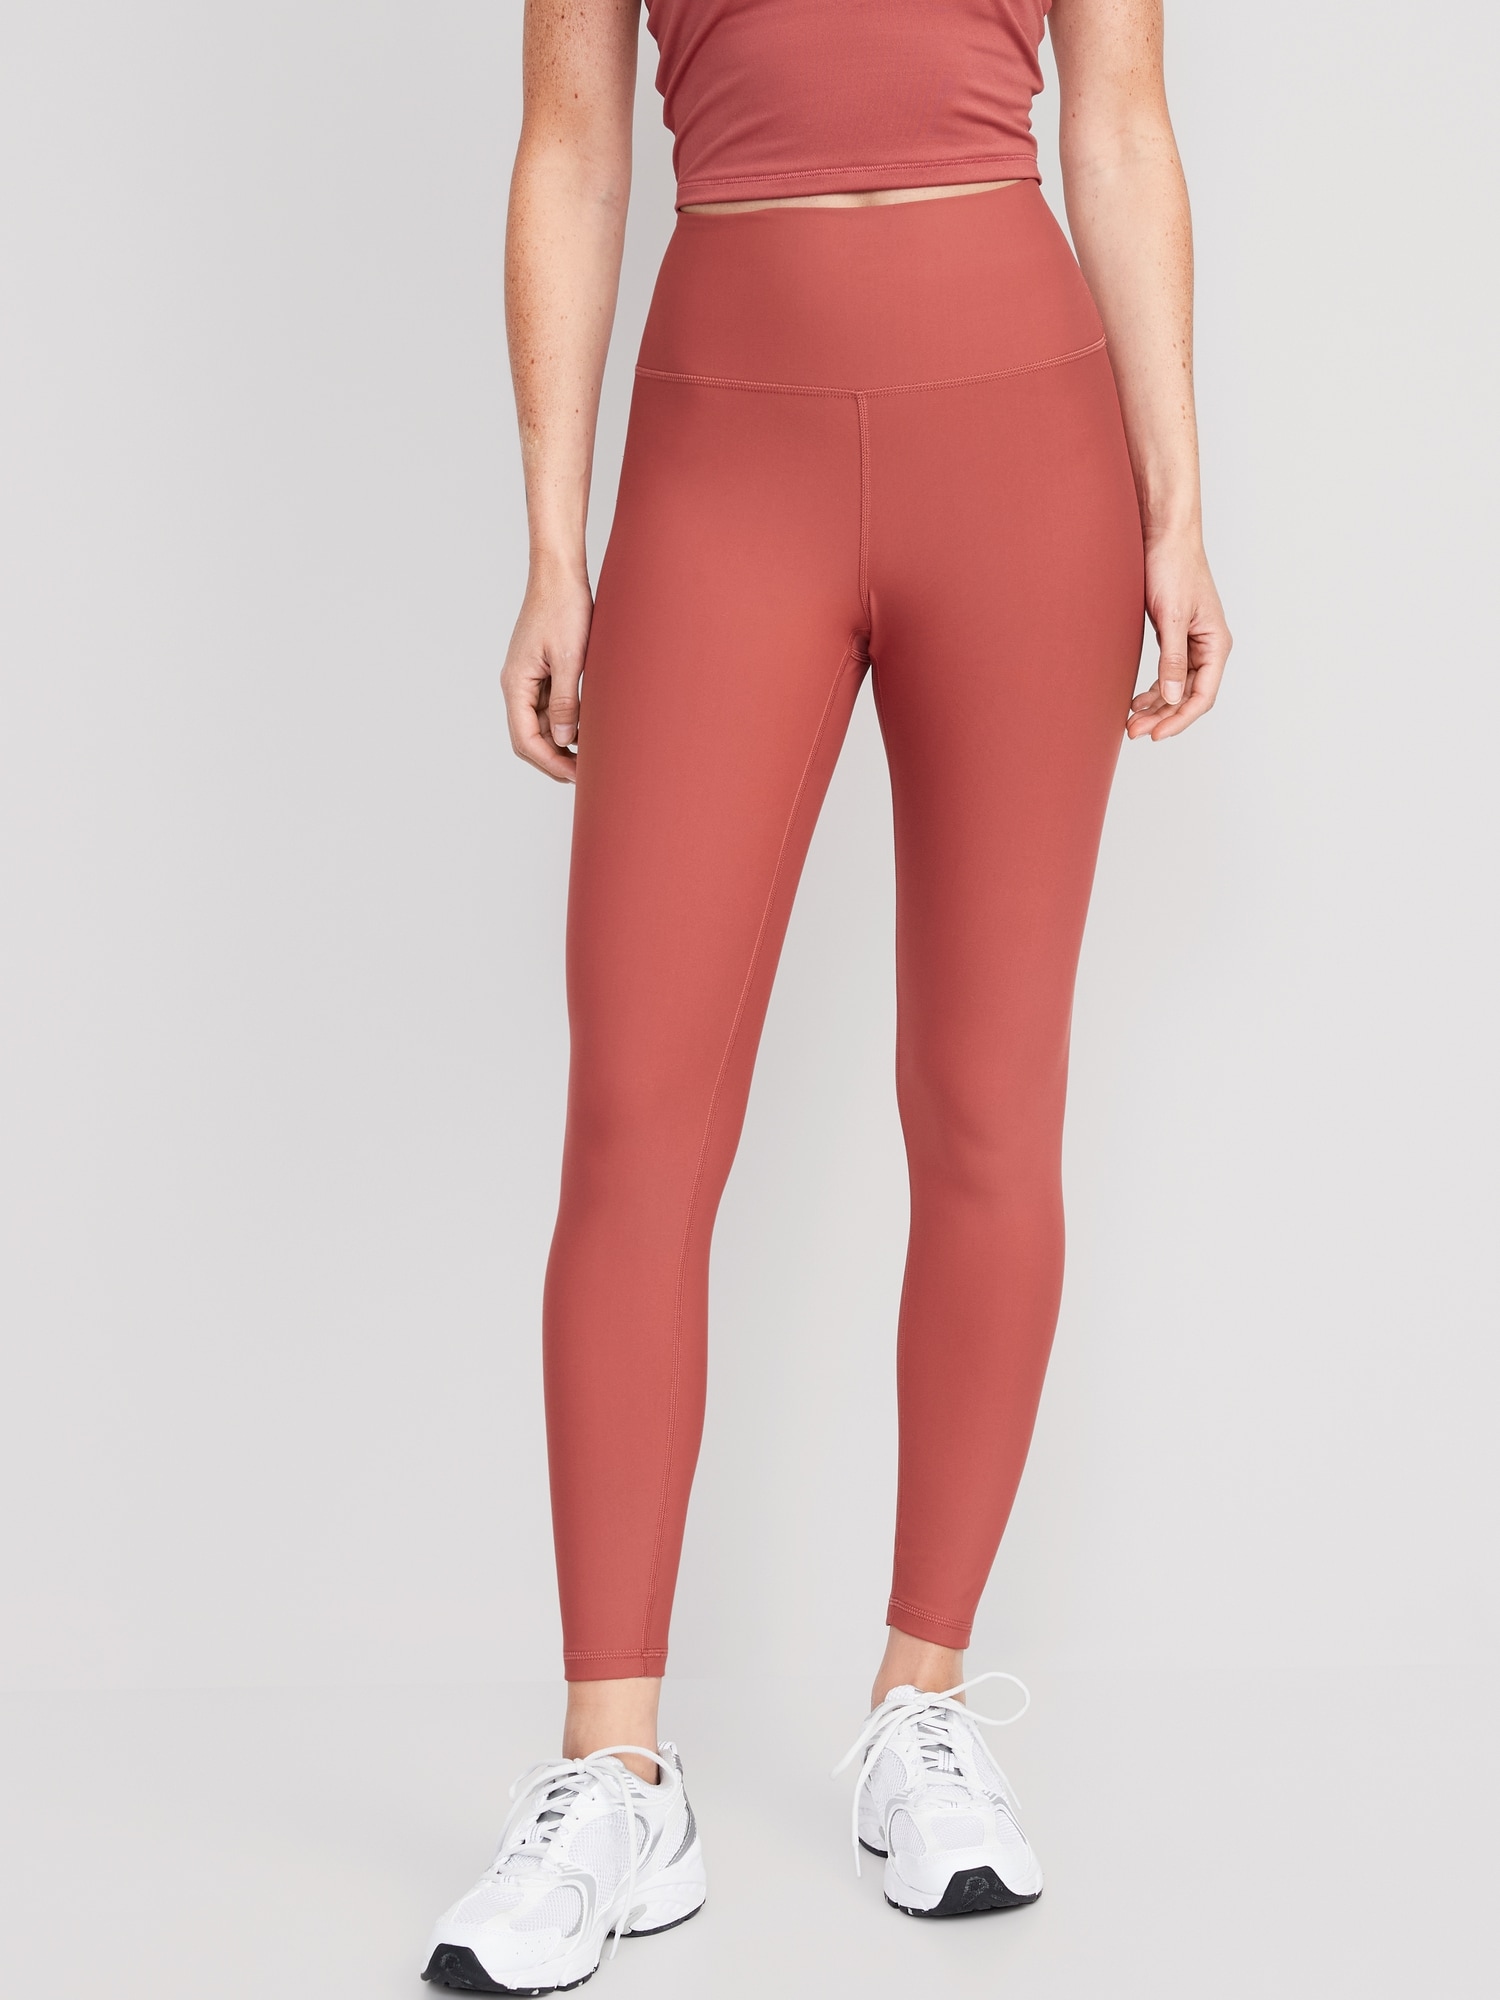 Old Navy - High-Waisted PowerSoft 7/8-Length Leggings for Women pink